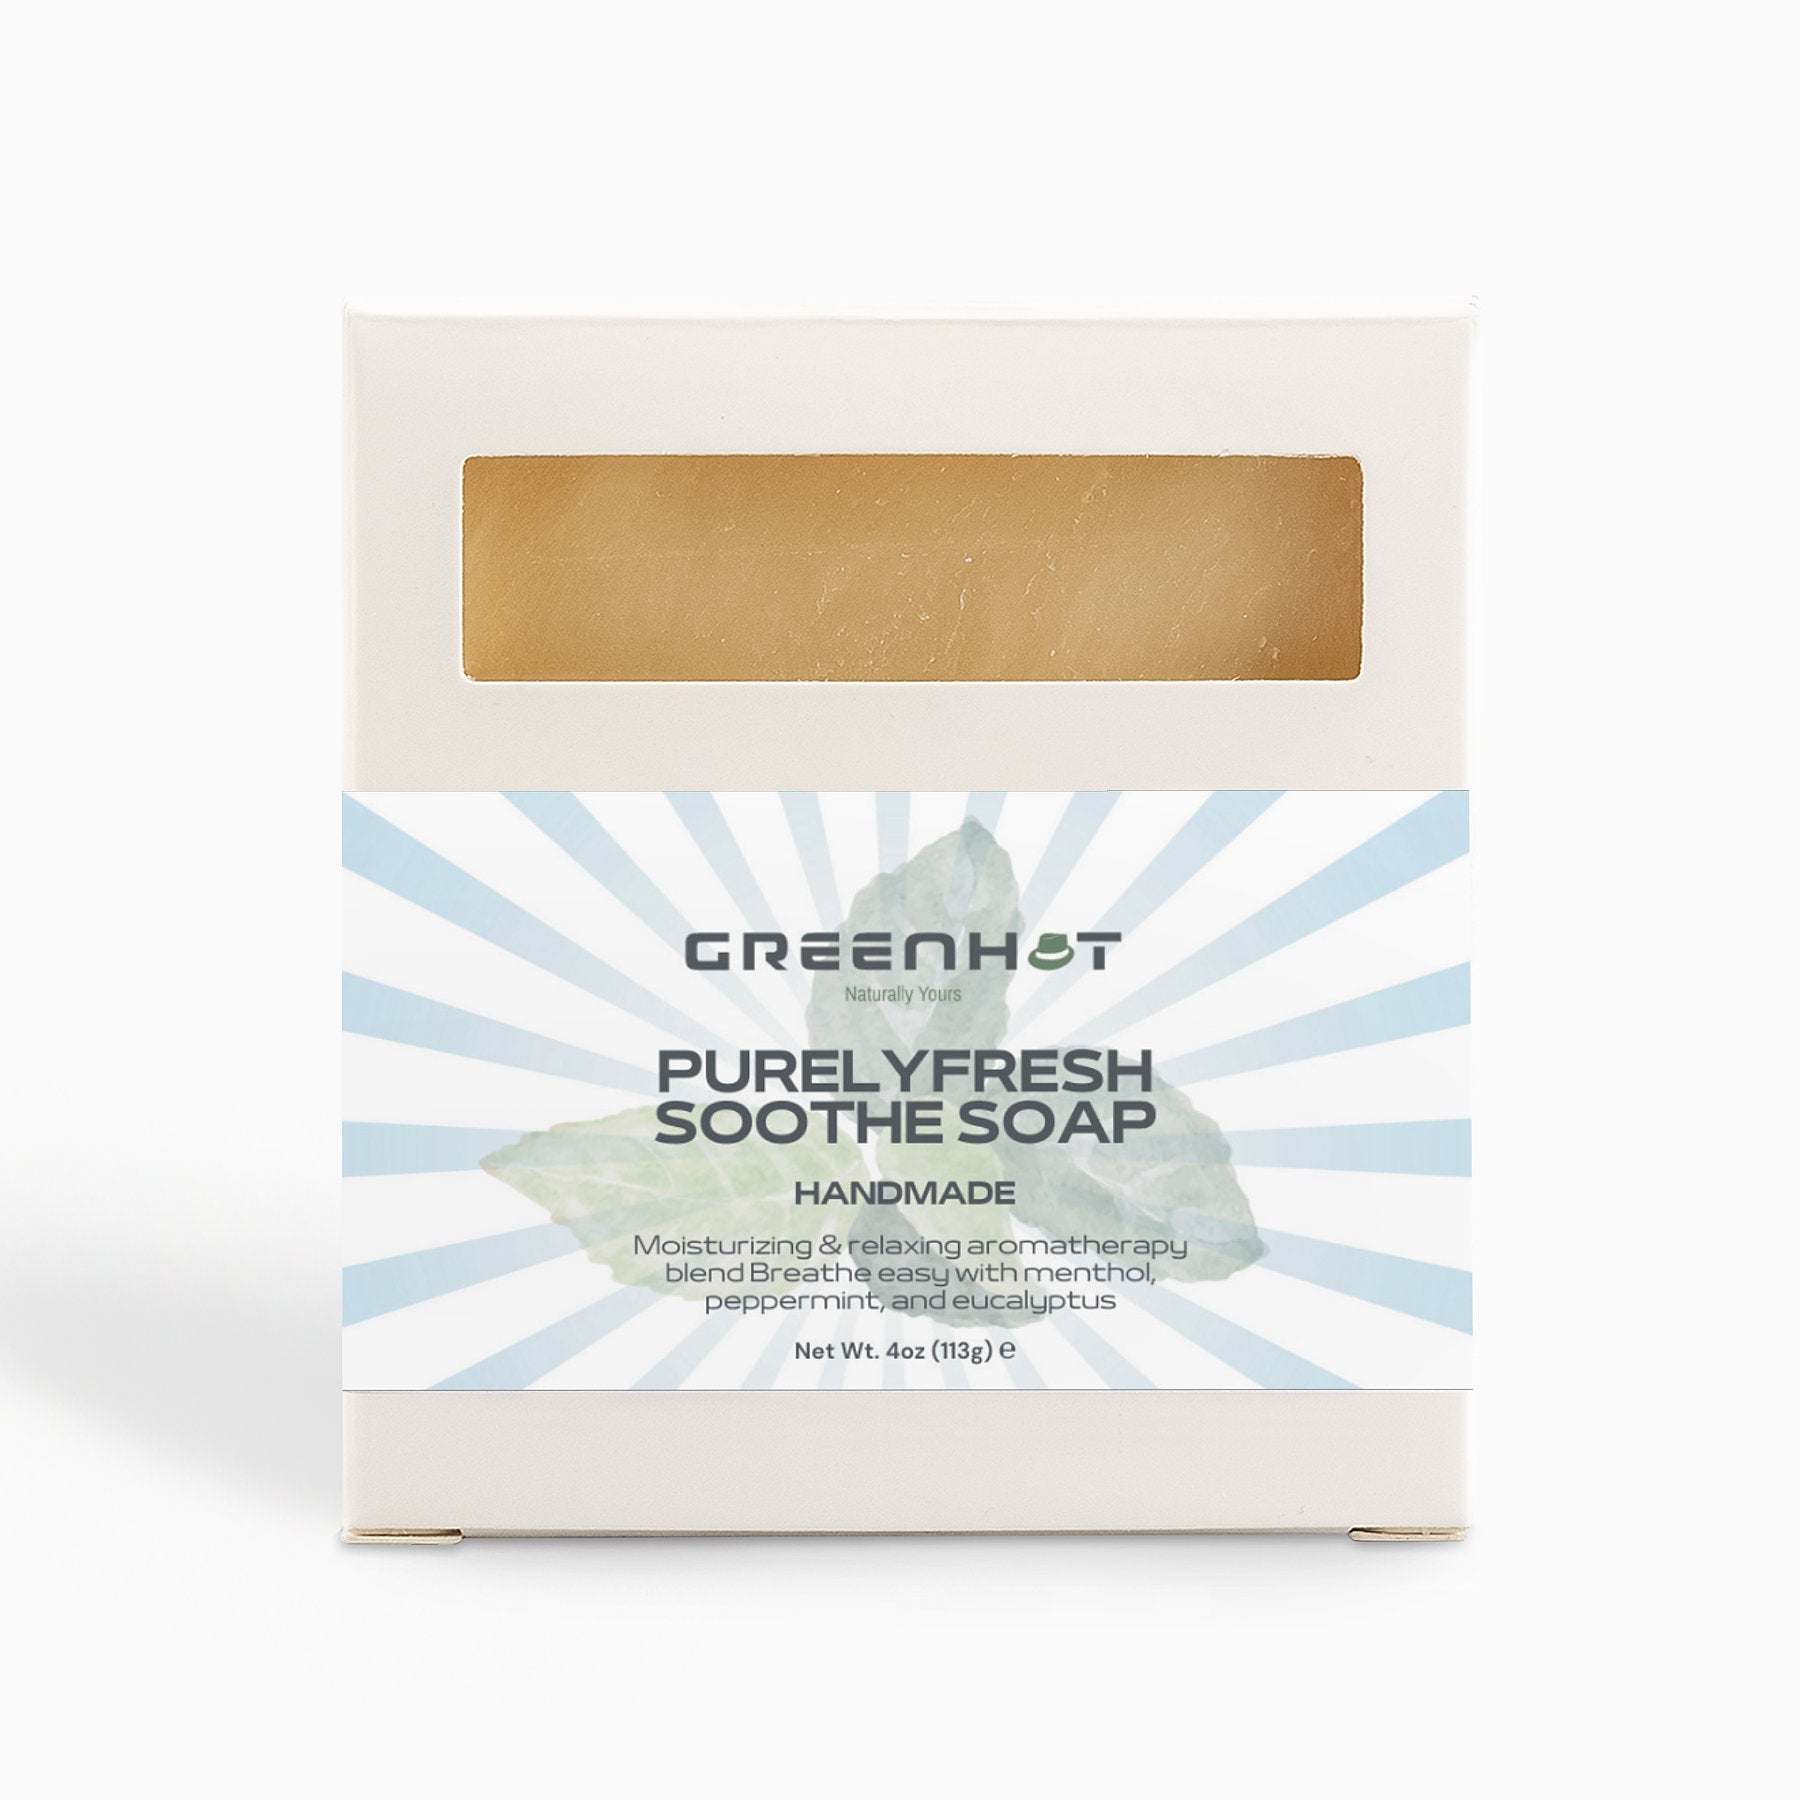 A box of PurelyFresh Soothe Soap by GreenHat featuring a minimalist design with a white and teal label, displayed against a white background. This moisturizing soap is made with natural ingredients.